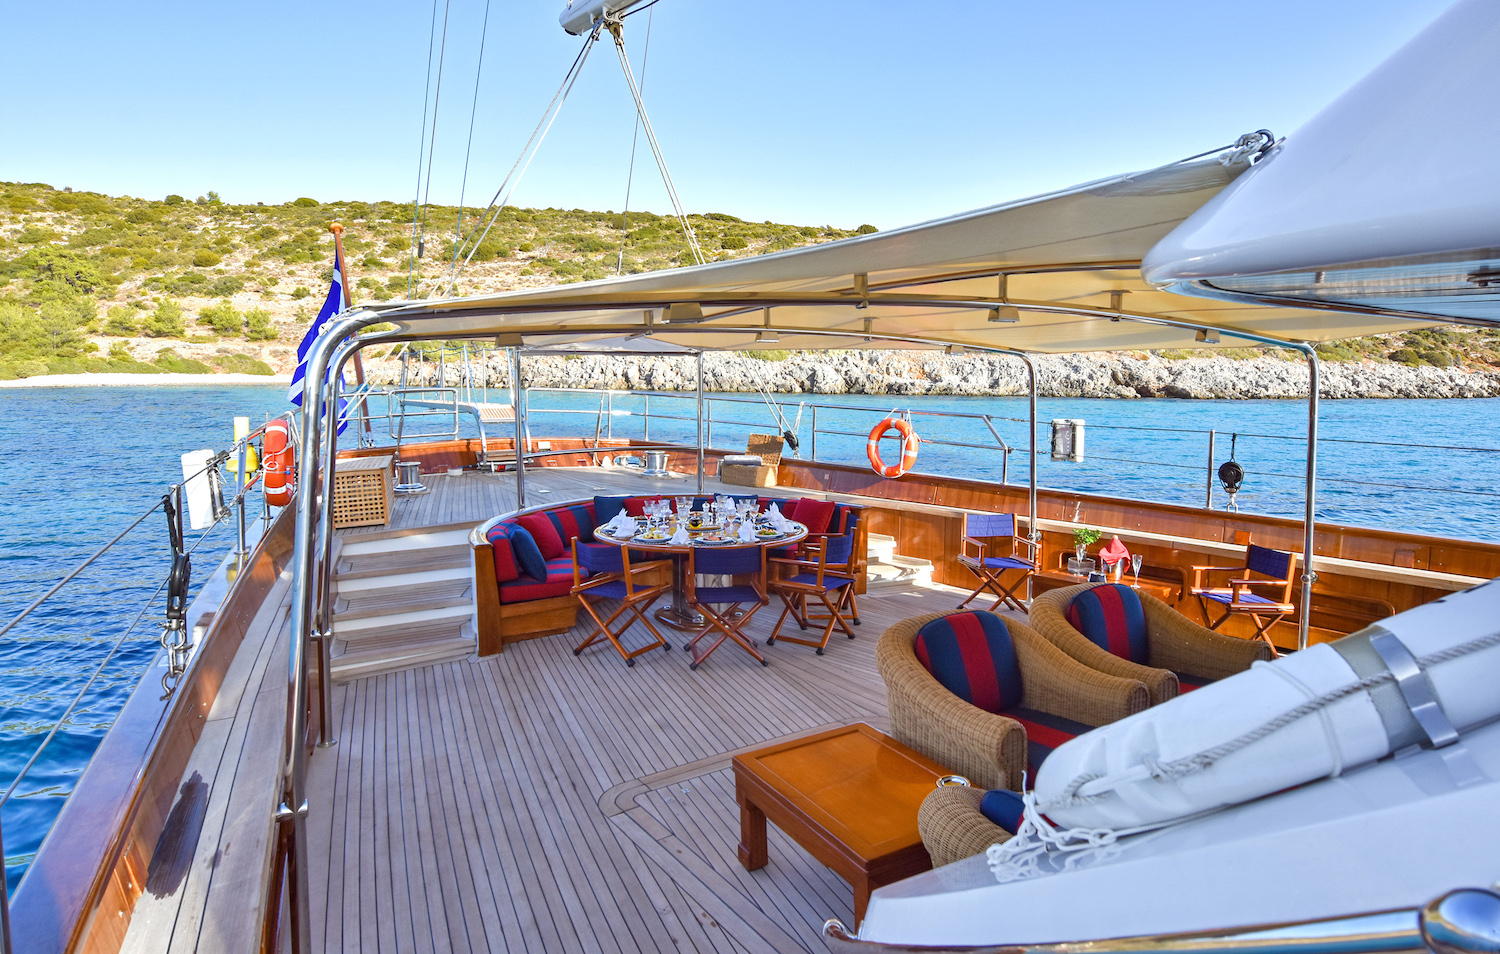 Aft Deck Of The Yacht